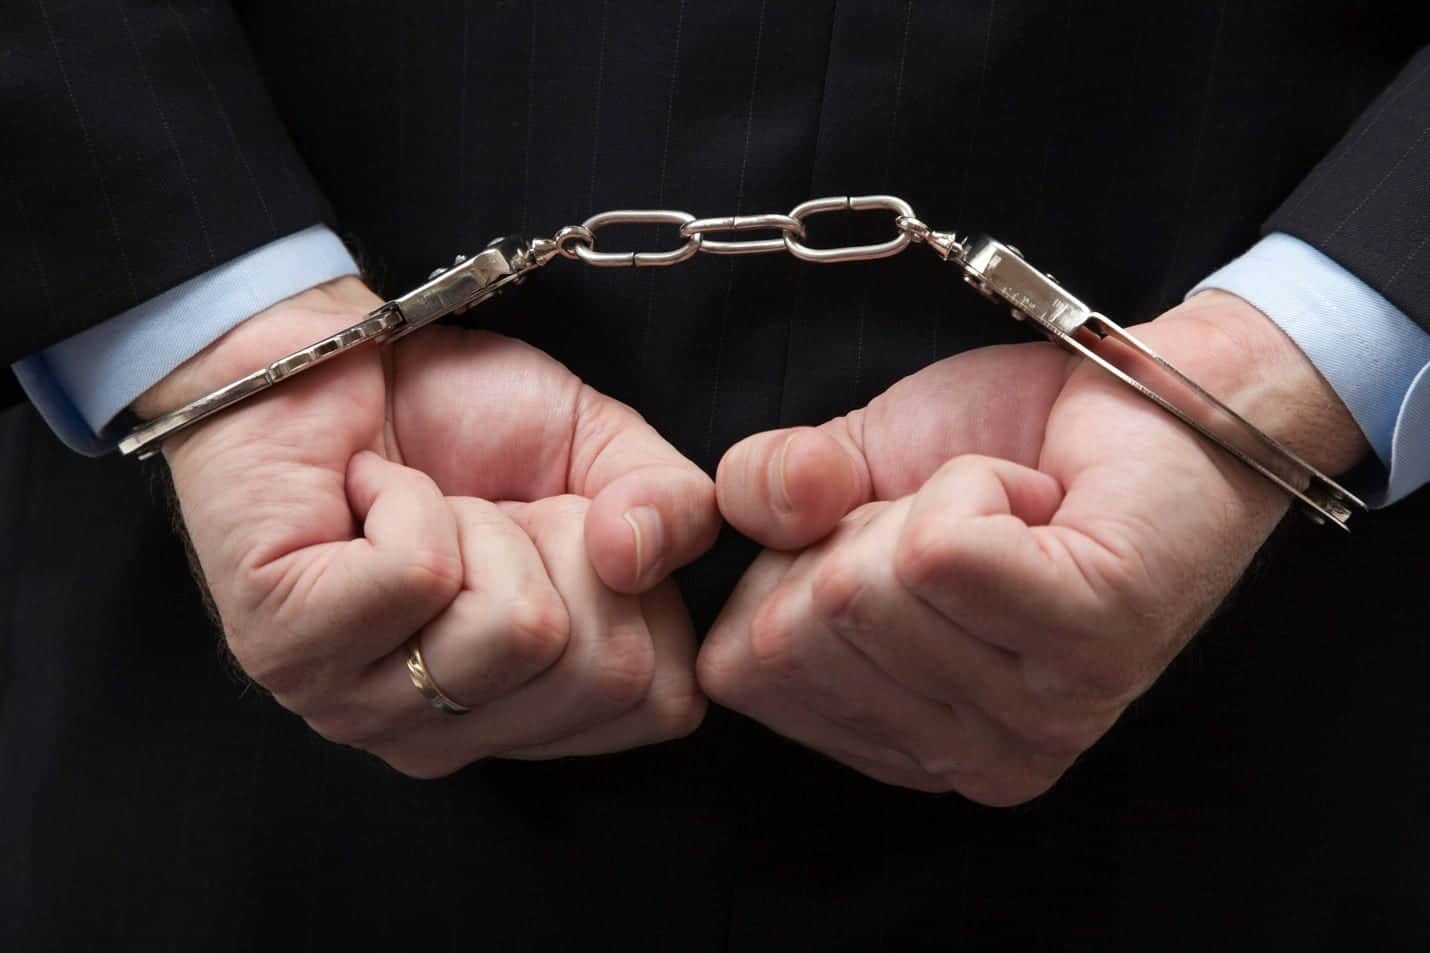 Penalties for White Collar Crimes in Minneapolois